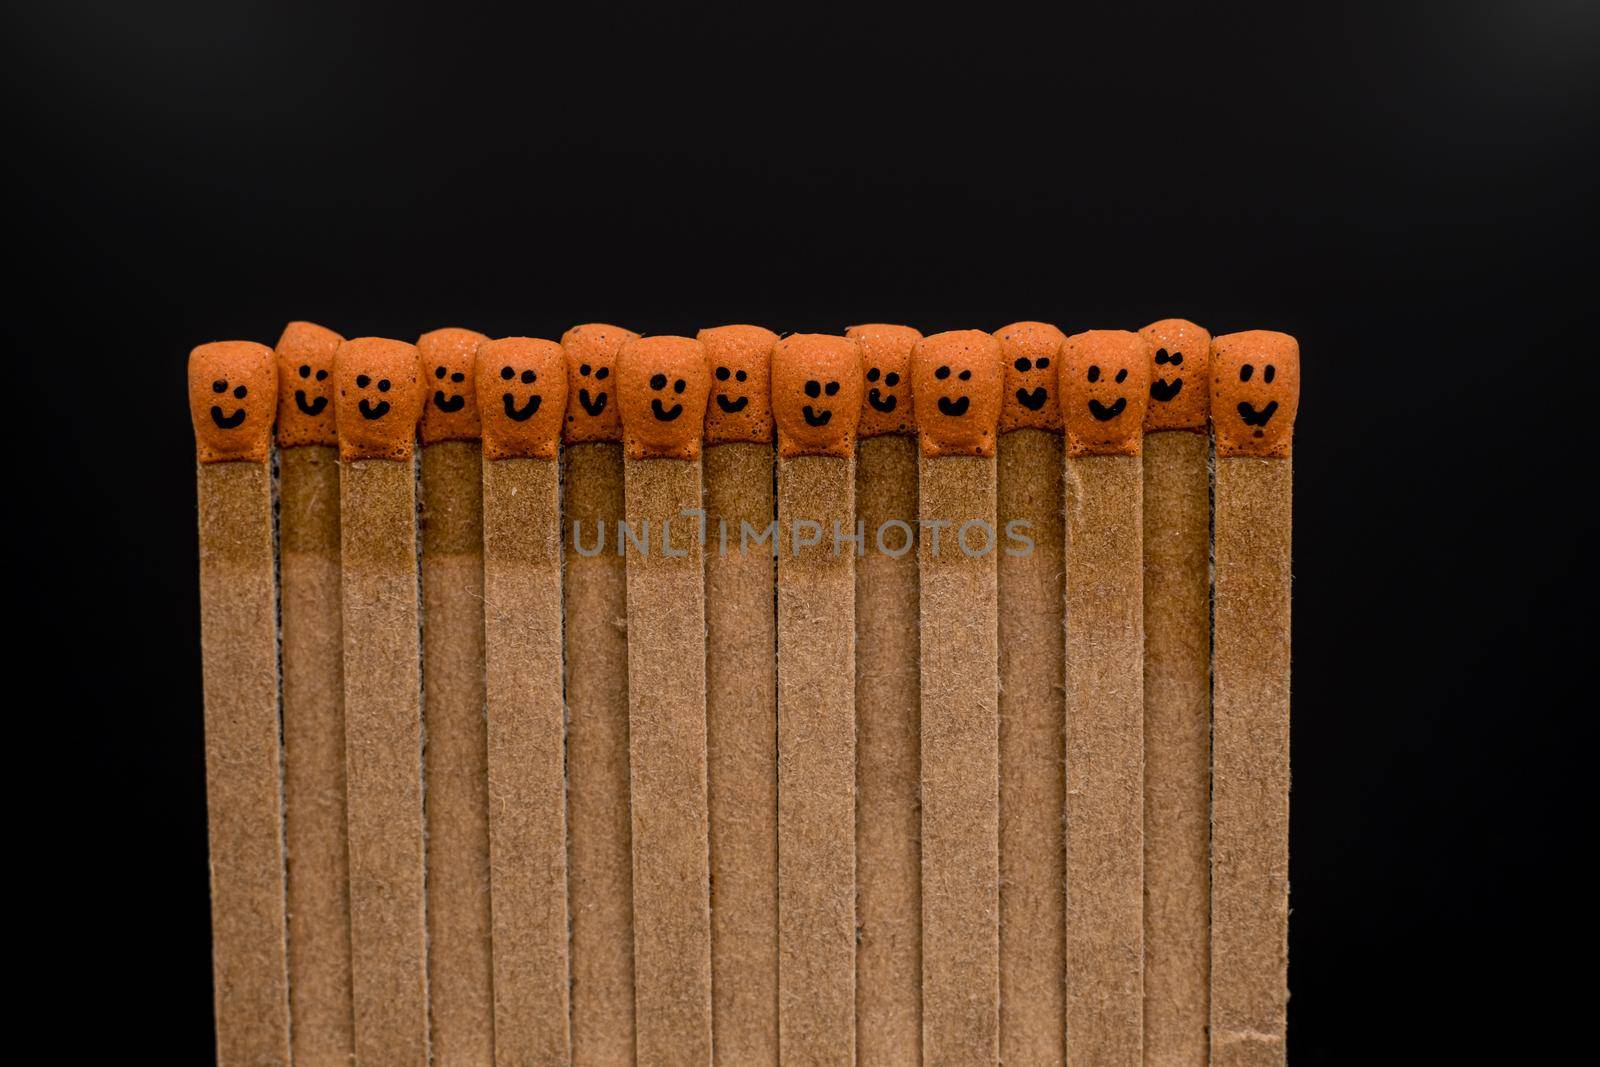 matchsticks with faces painted on the heads by Roberto